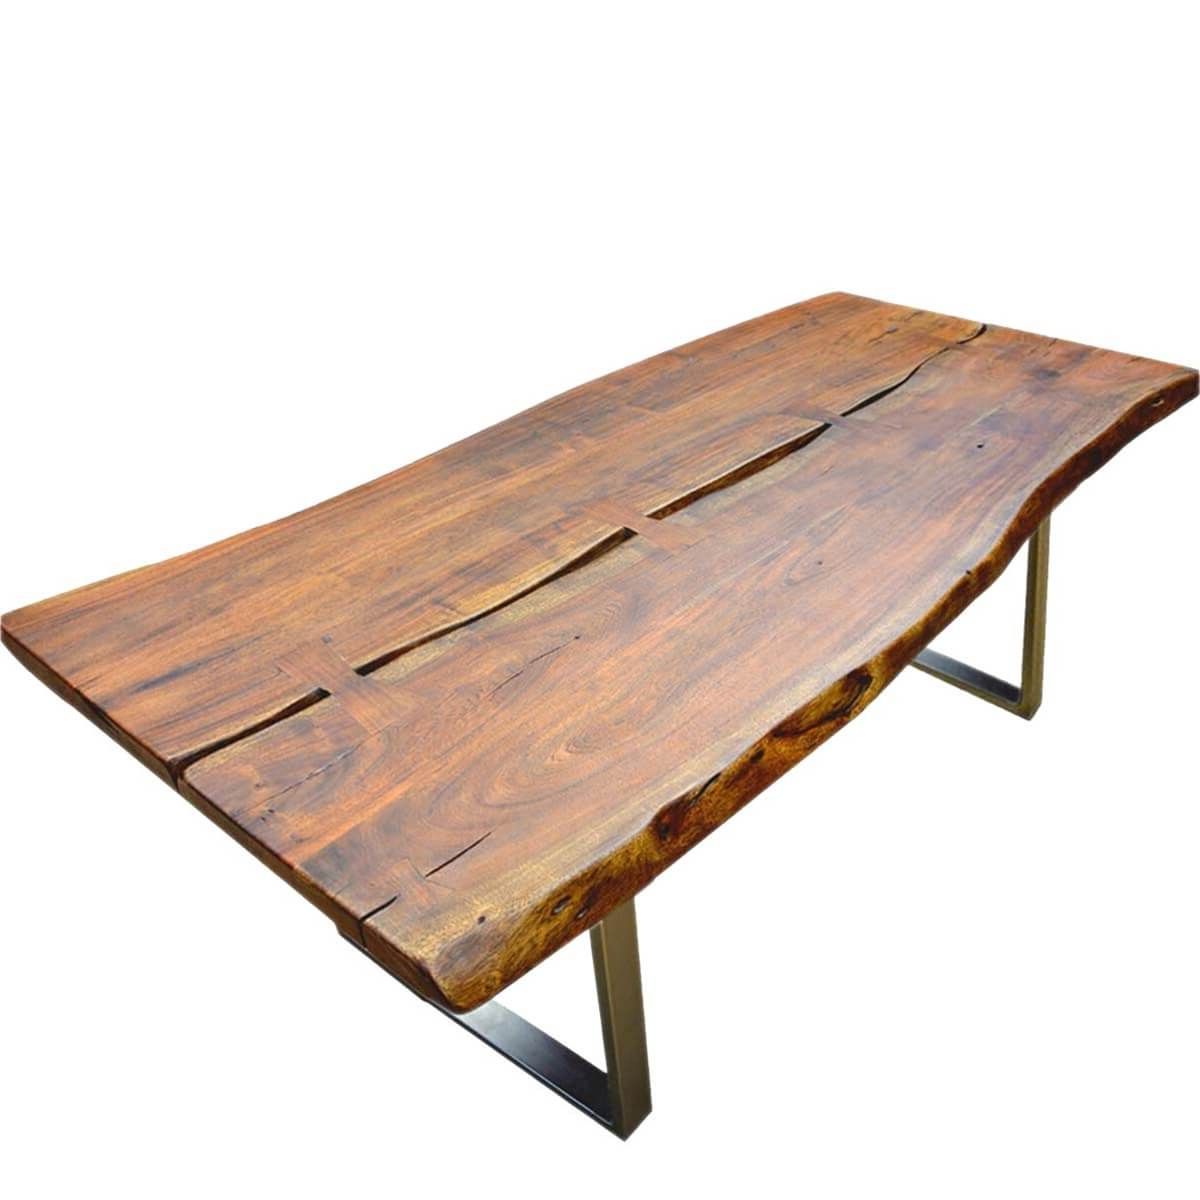 Latest Acacia Wood Top Dining Tables With Iron Legs On Raw Metal Pertaining To Live Edge Acacia Wood & Iron Rustic Large Dining Table (View 7 of 25)